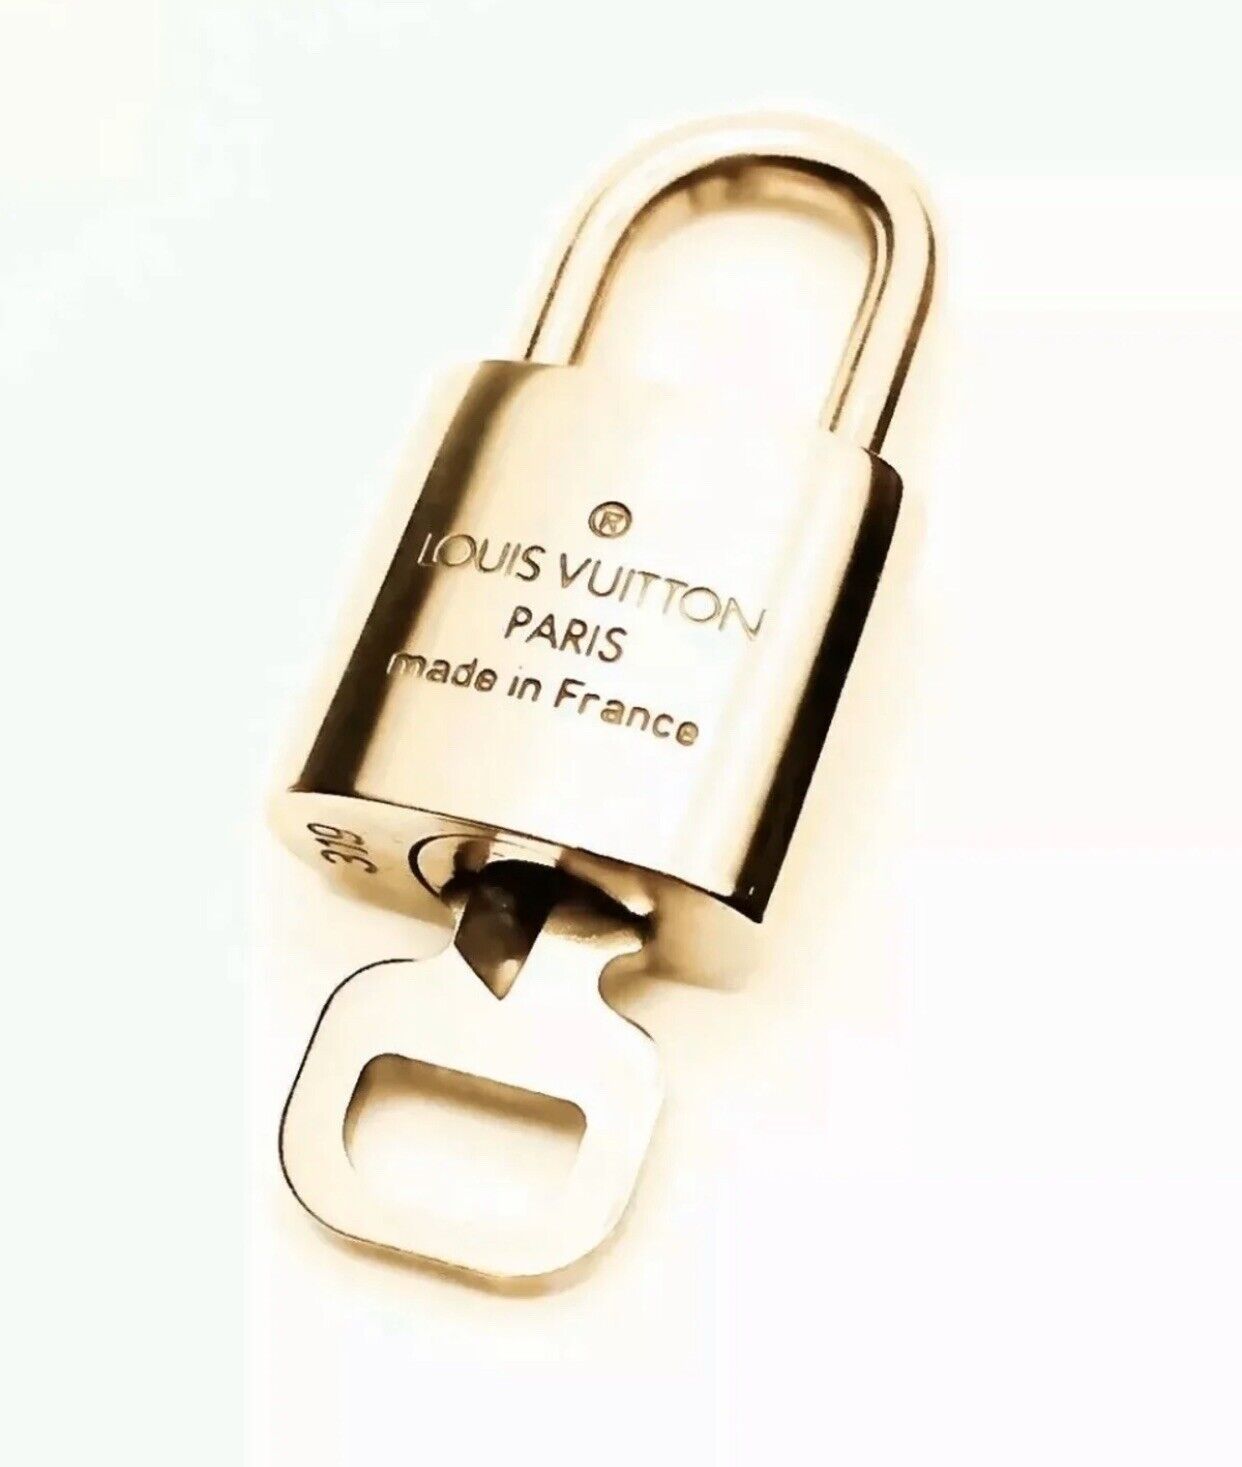 Louis Vuitton PadLock & Key Any # Brass Gold Charm Lock For LV Bag 💯% AUTHENTIC